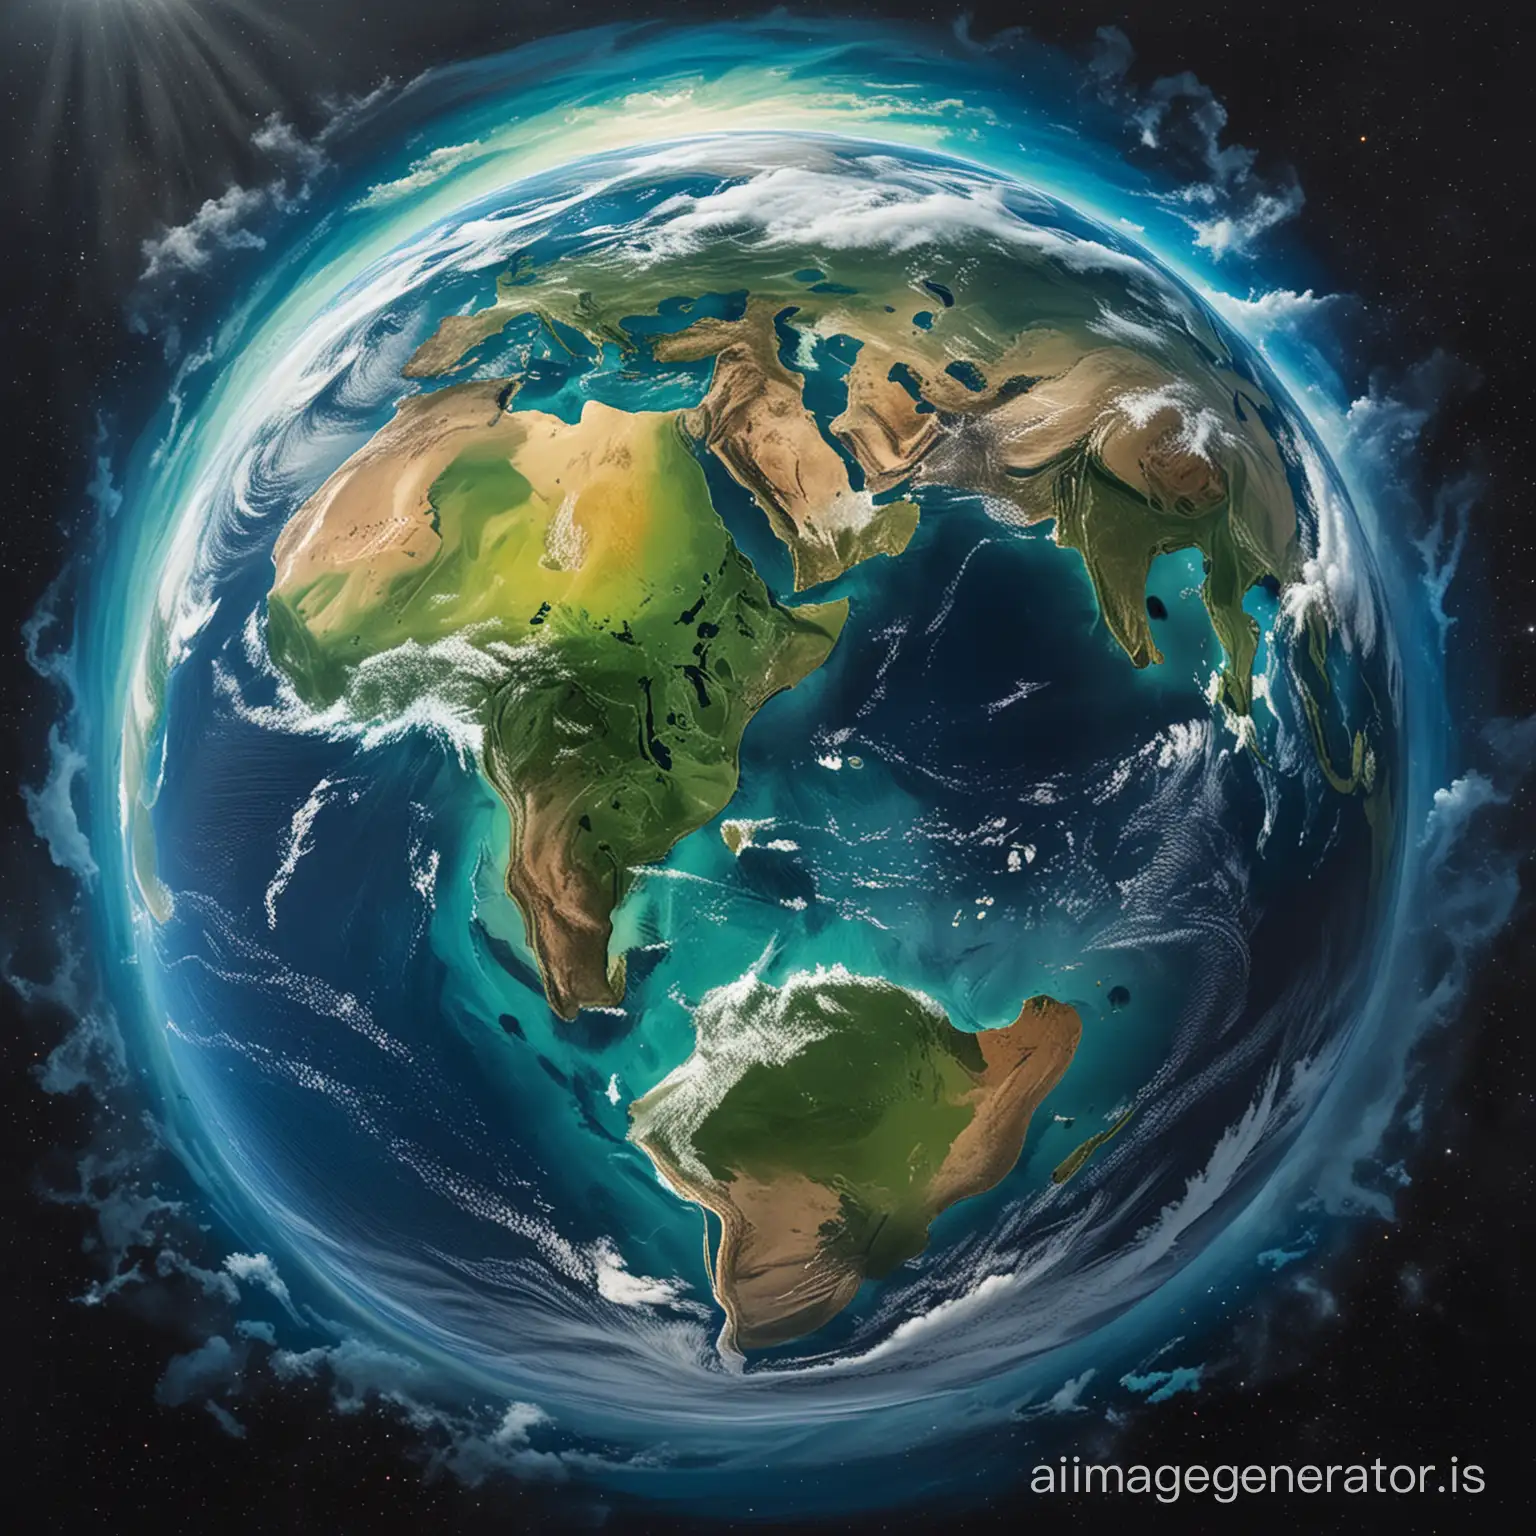 Request a vibrant and colorful depiction of Earth from space, emphasizing its blue oceans, green continents especially Africa, and swirling clouds.